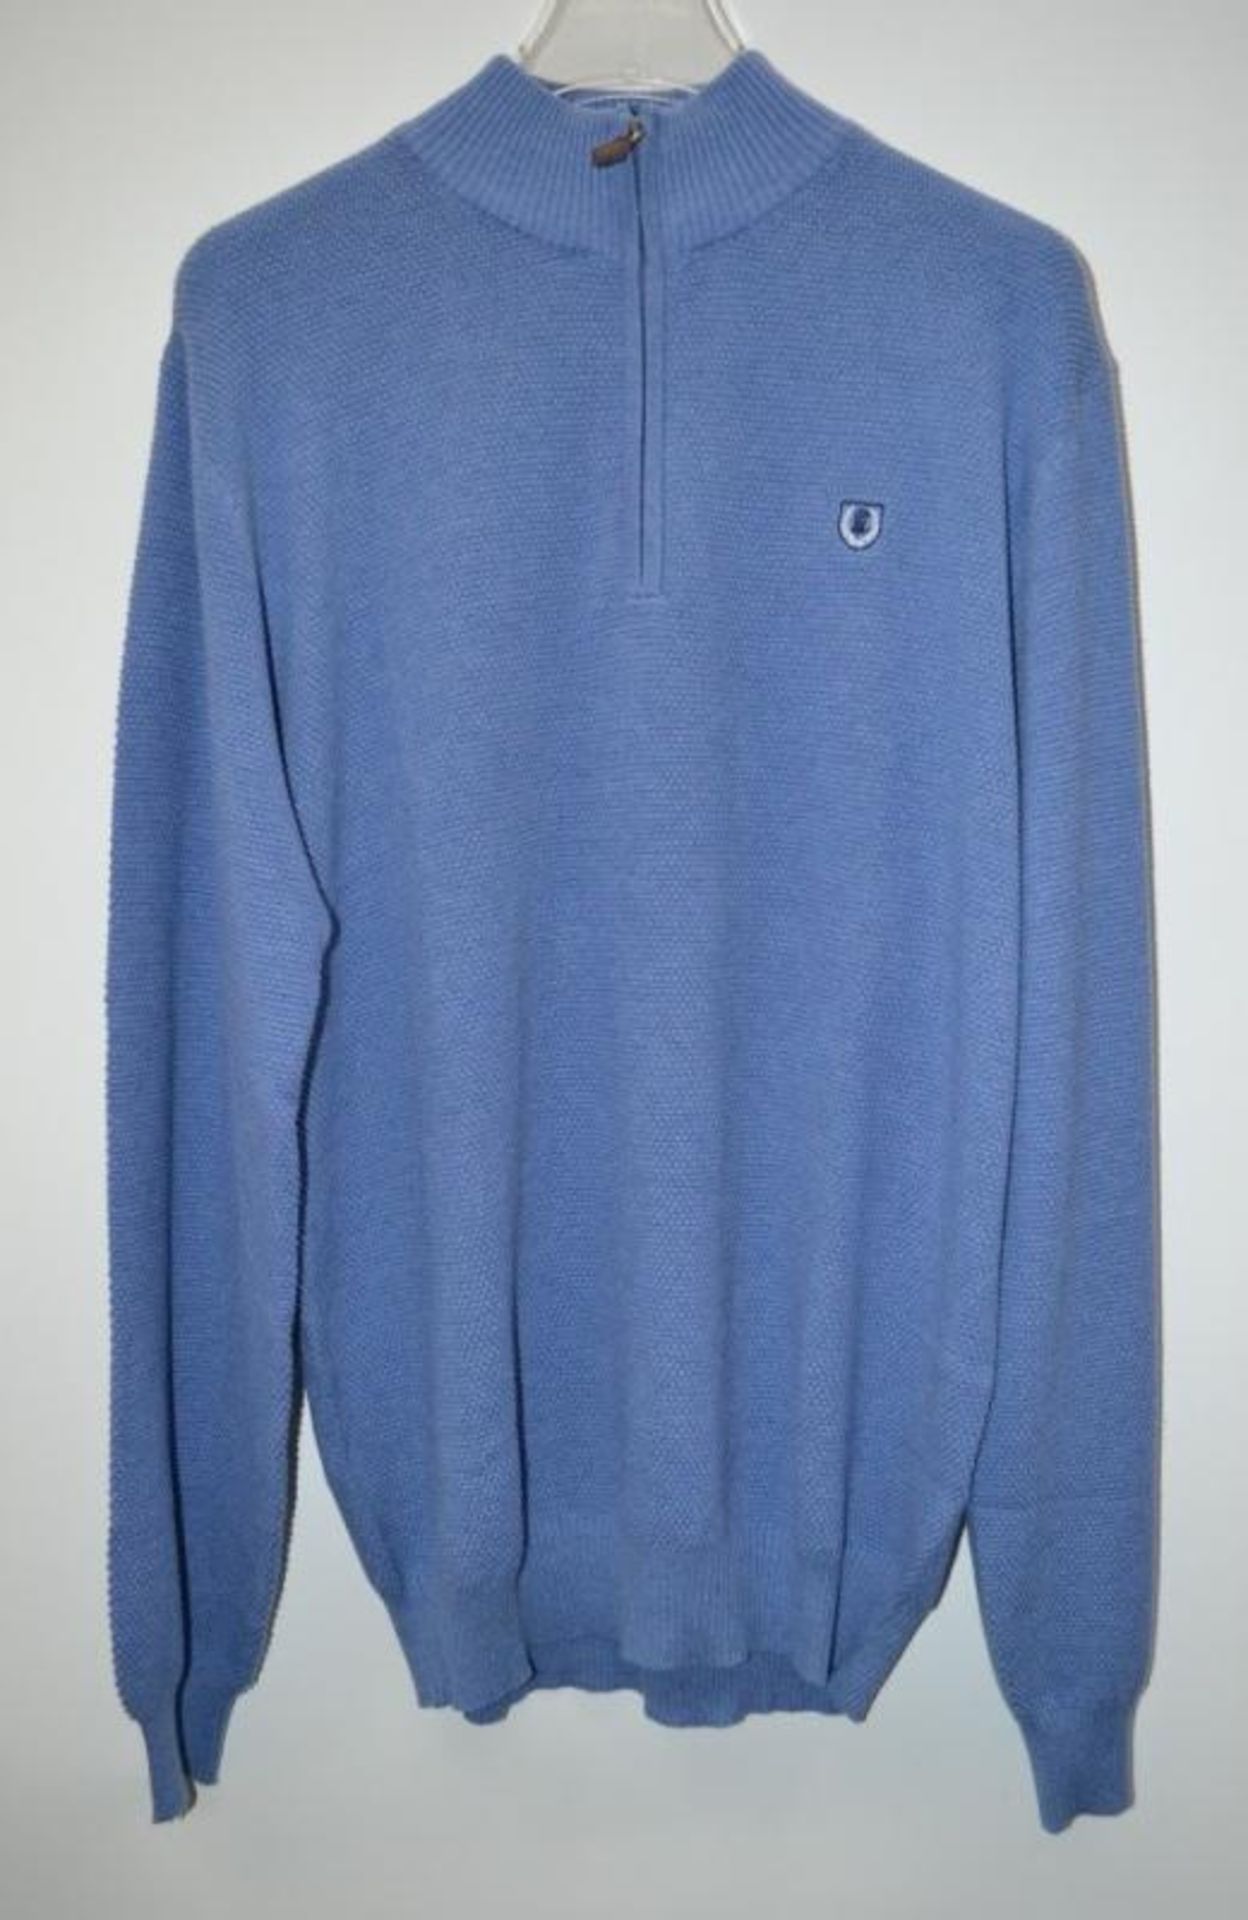 5 x Assorted GNIOUS Branded Long Sleeve Tops / Sweaters - New Stock With Tags - Recent Retail - Image 4 of 7